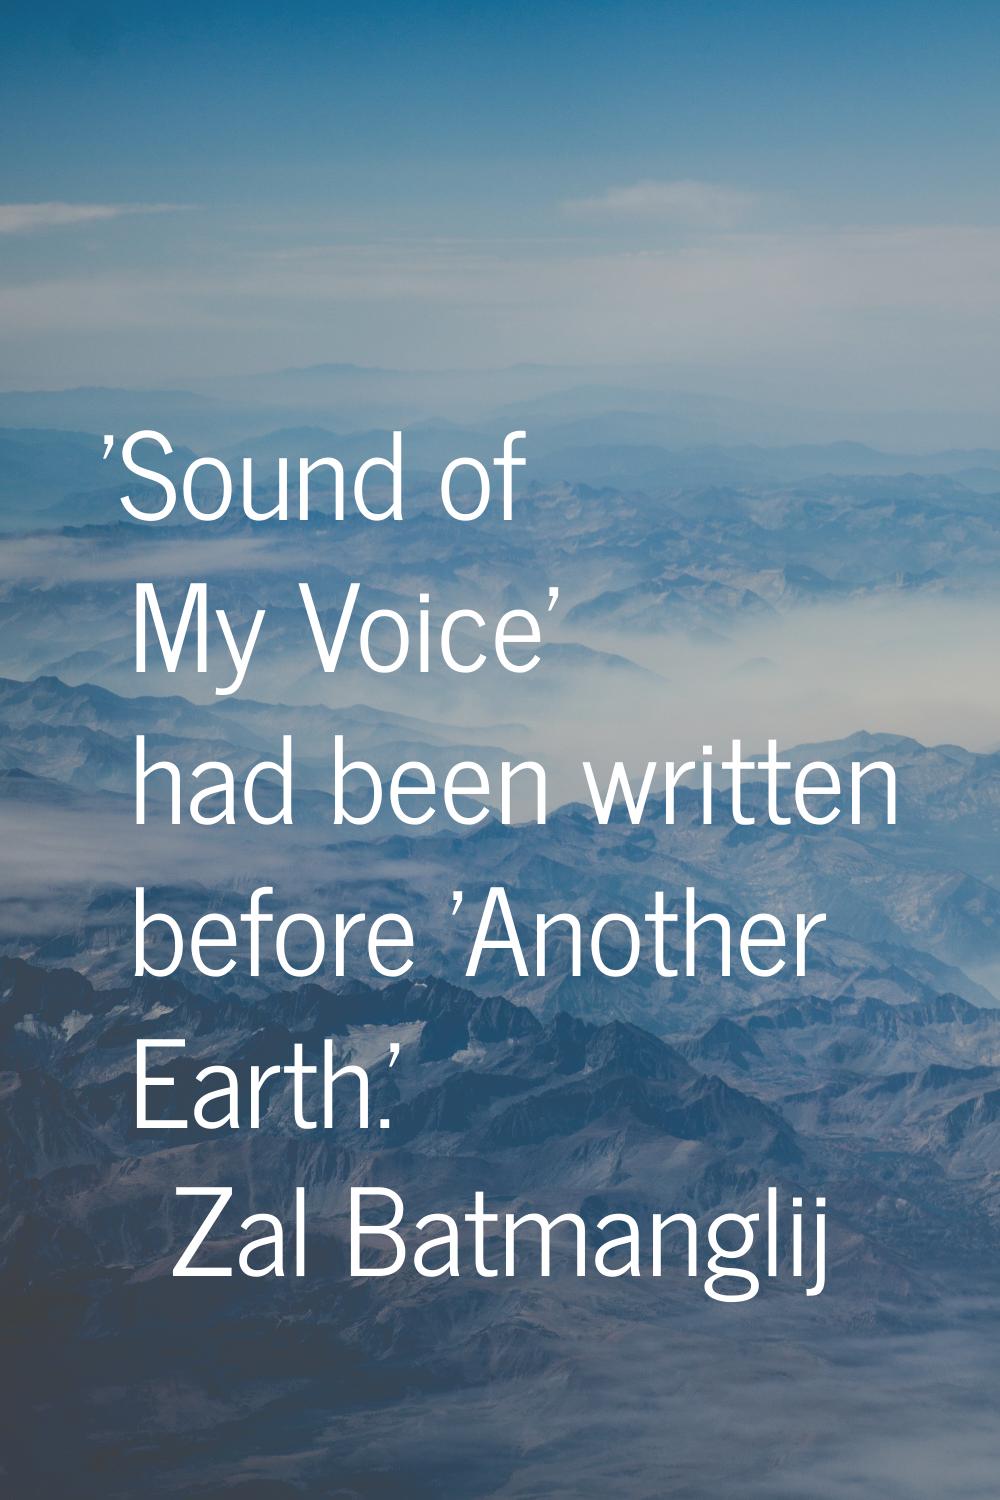 'Sound of My Voice' had been written before 'Another Earth.'